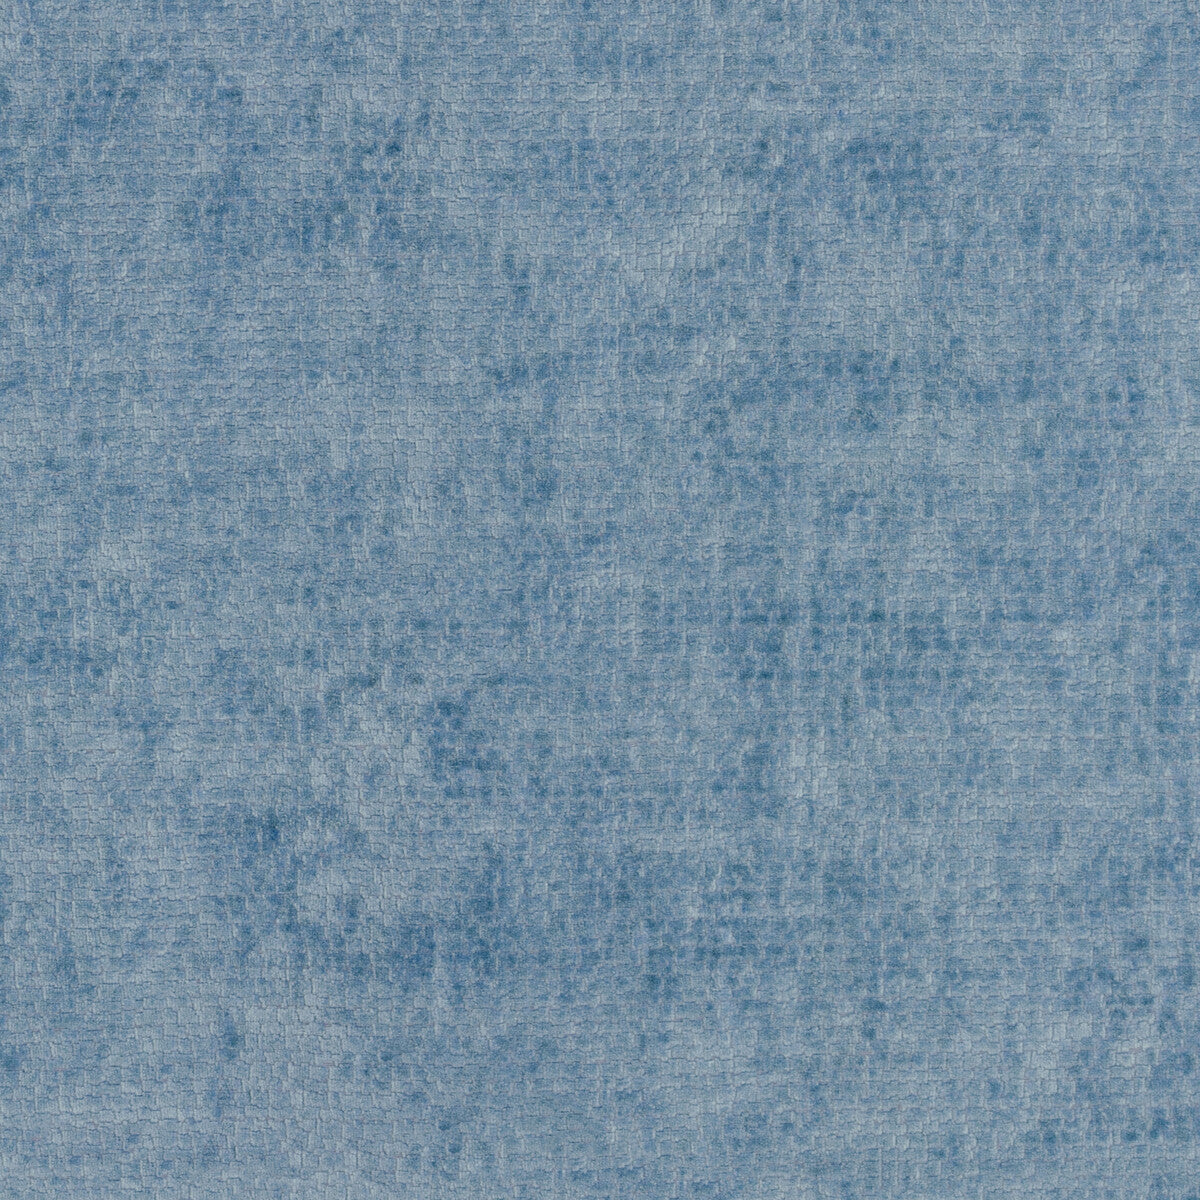 Rebus fabric in blue color - pattern GWF-3766.50.0 - by Lee Jofa Modern in the Kelly Wearstler VI collection